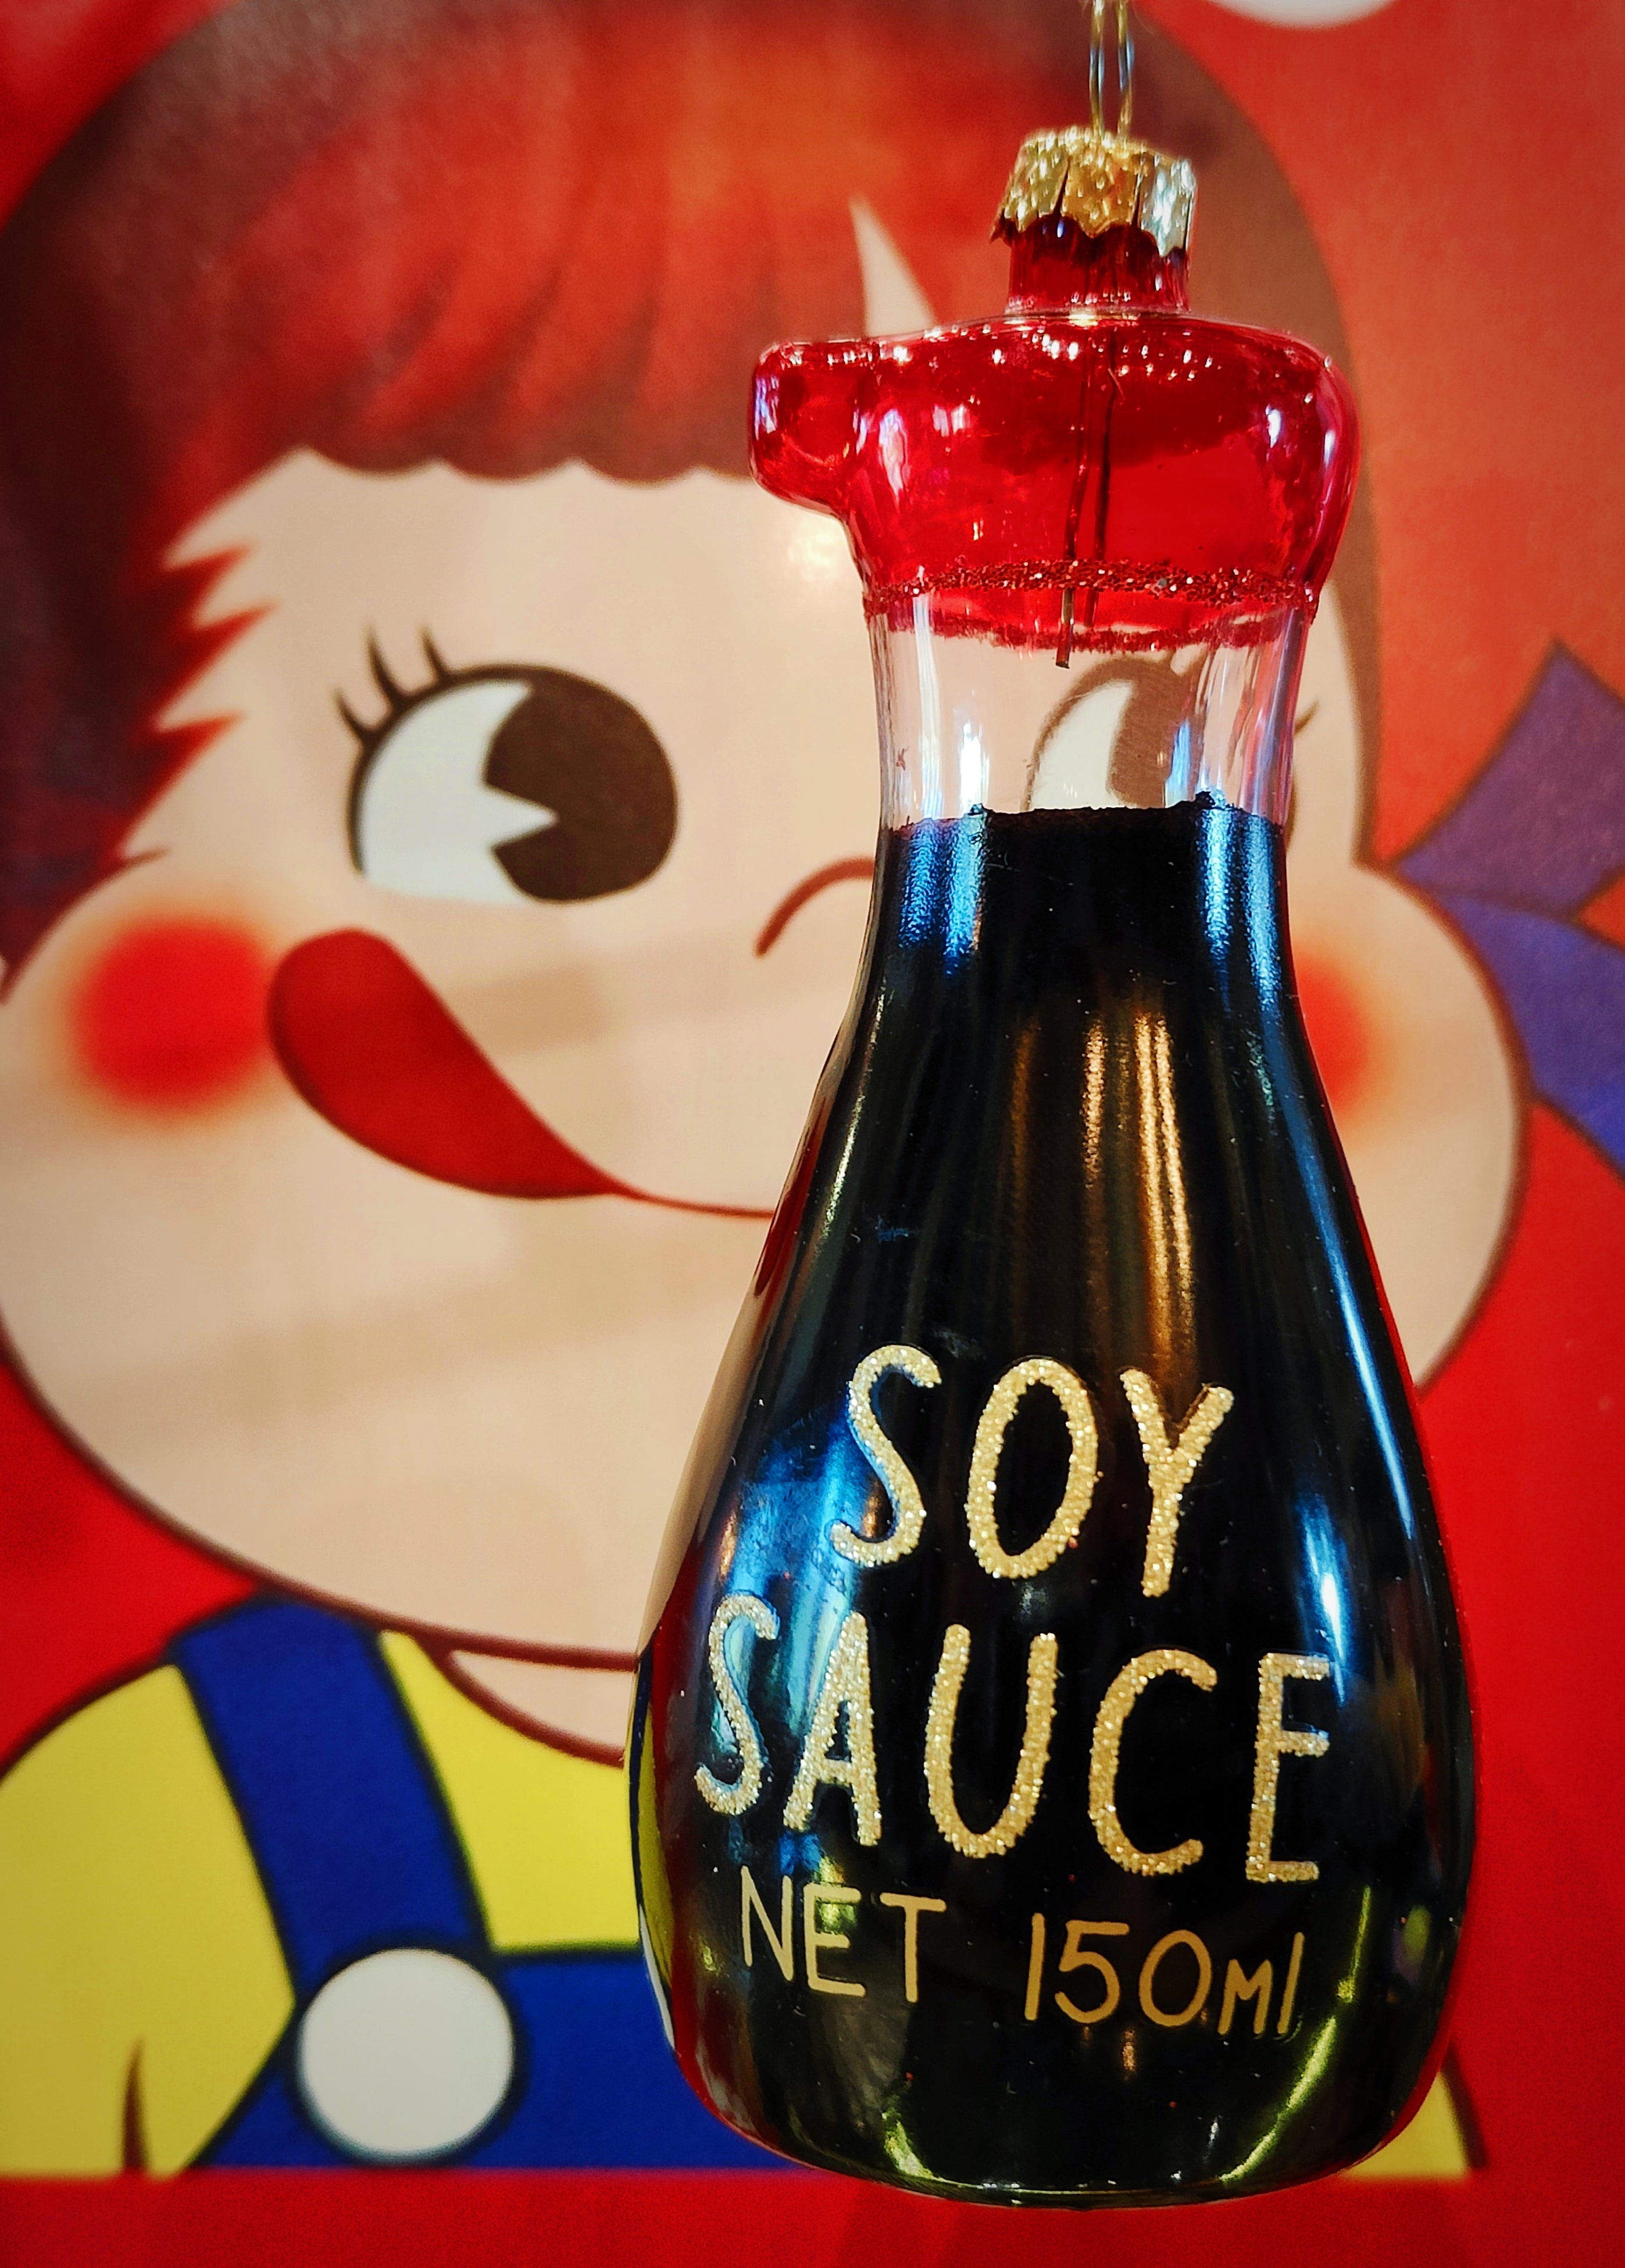 Yummy Soy sauce decorations to gift to a devotee or hang from your tree!

Hand painted glass.

Measuring 12 x 5 x 5cm 

Fragile, handle with care

 

Cody Foster and Co. Cody Foster decorations. Soy sauce